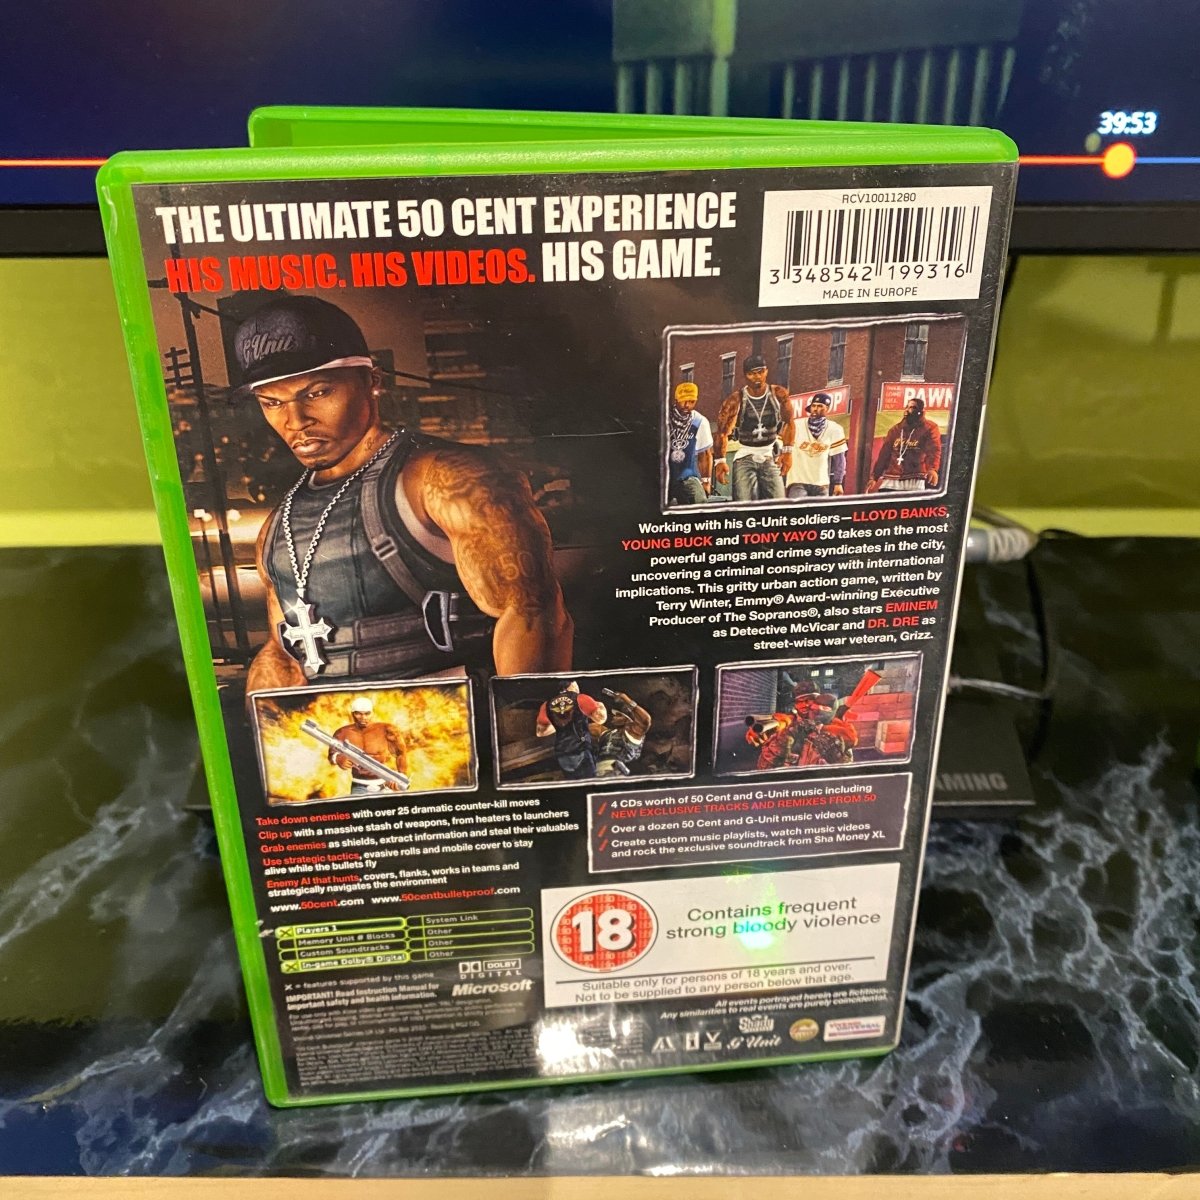 Buy 50 Cent: Bulletproof xbox game -@ 8BitBeyond